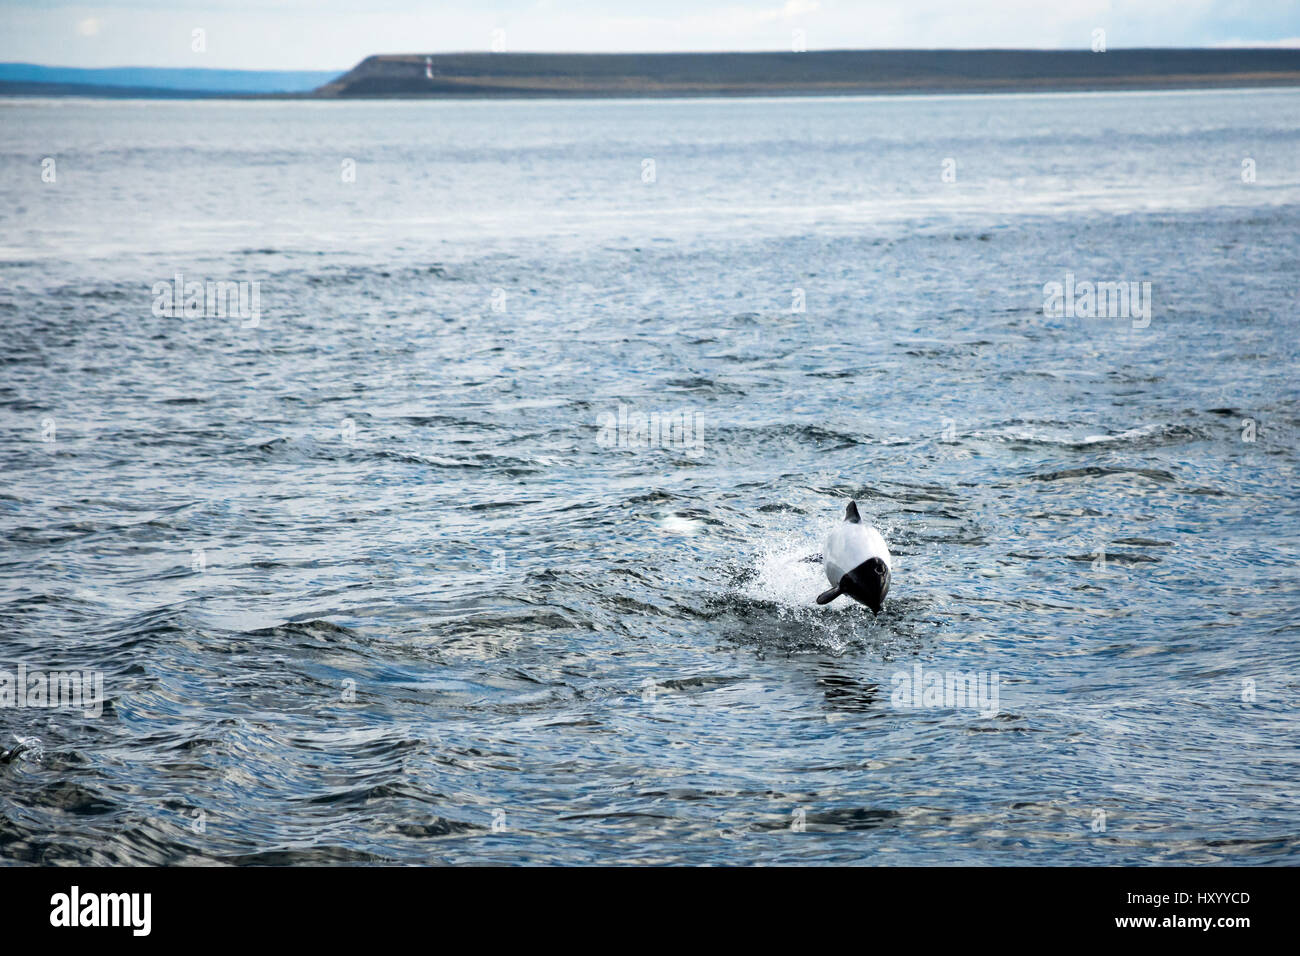 A Commerson's dolphin (Cephalorhynchus commersonii) jumps out of the water off the coast of Punta Arenas, Chile. Stock Photo